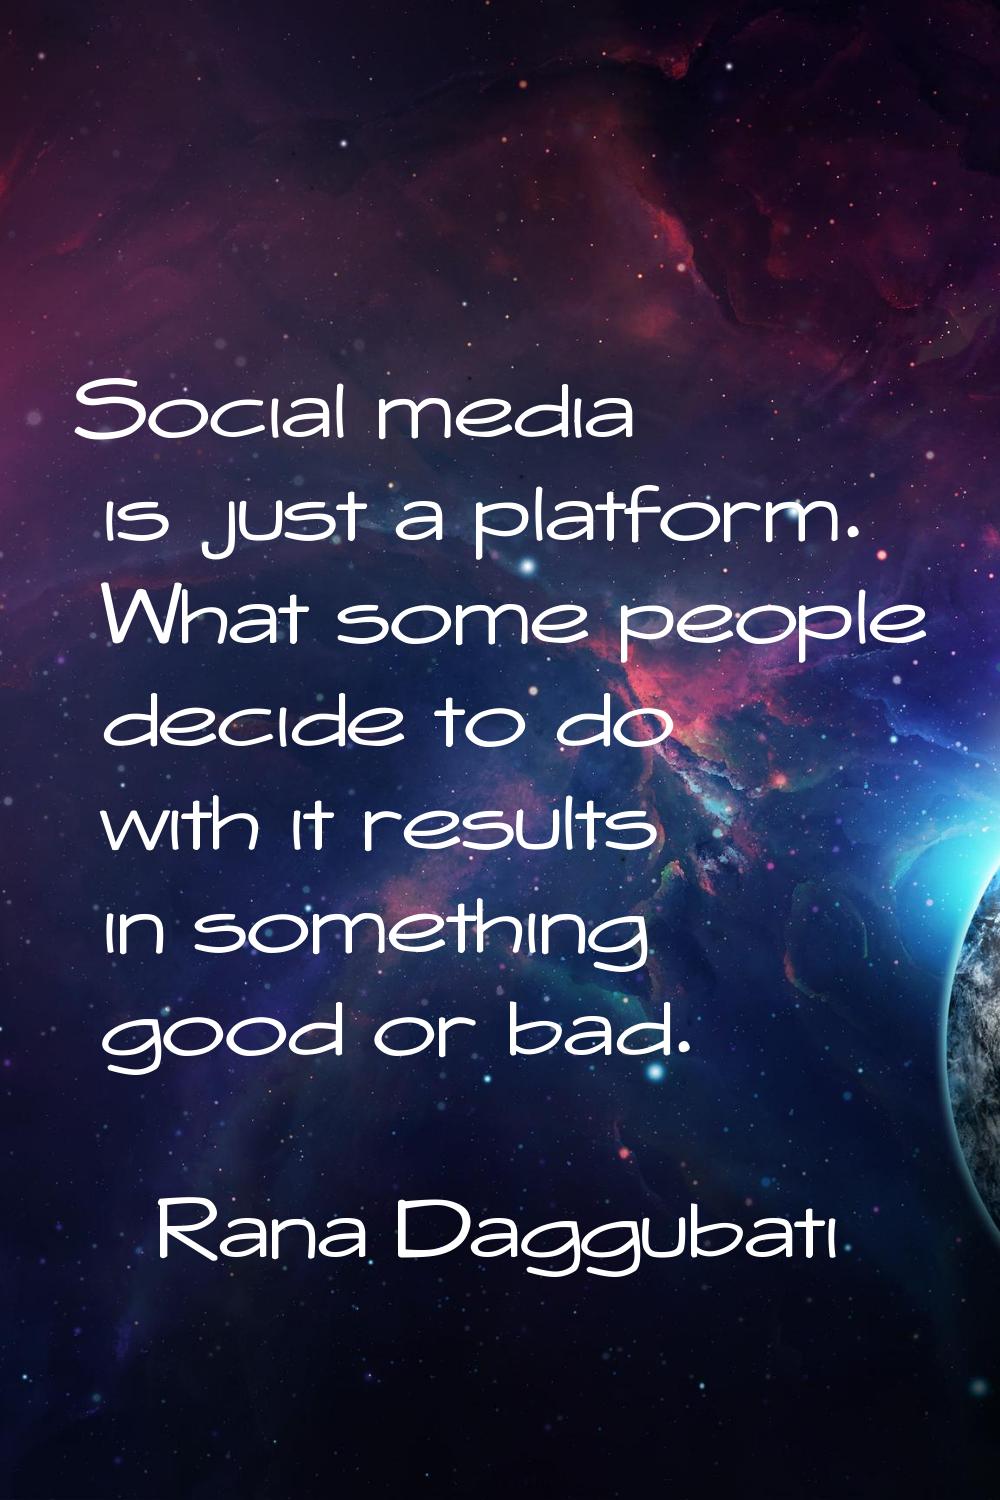 Social media is just a platform. What some people decide to do with it results in something good or